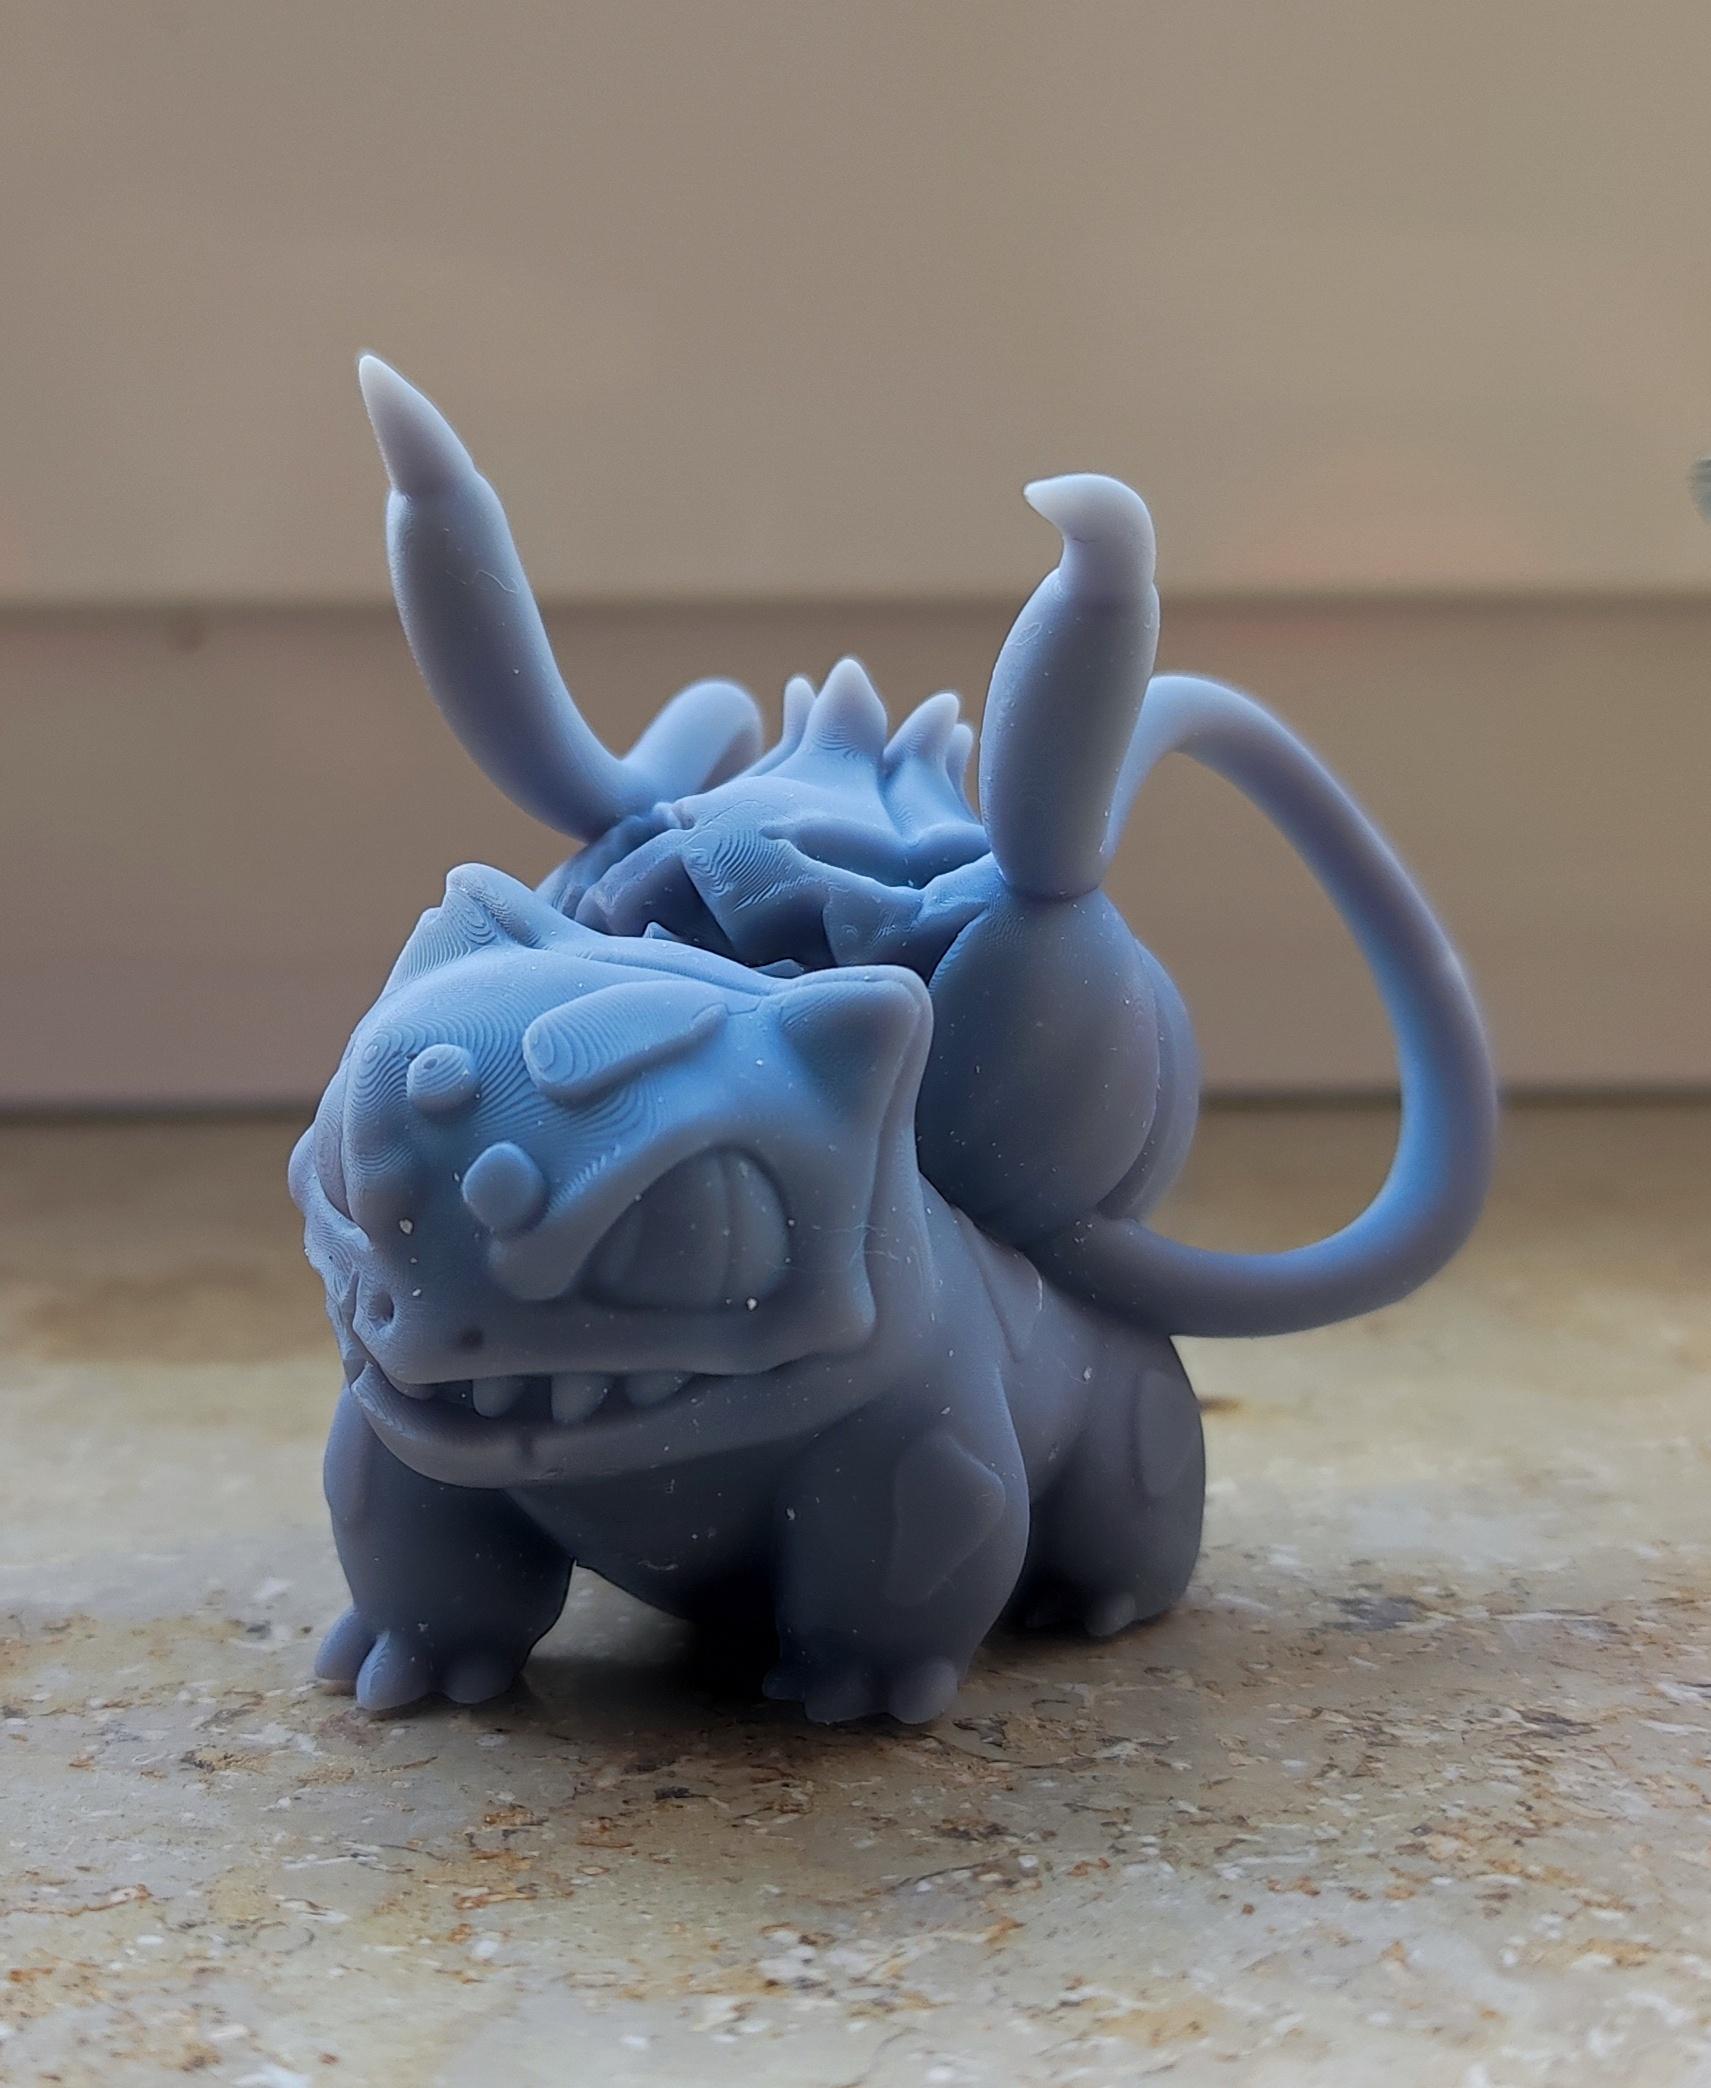 Bulbasaw - halloween - Pokemon - Fan art - Printed in Resin, using the Anycubic Photon Mono X with Anycubic Standard Resin Grey - 3d model